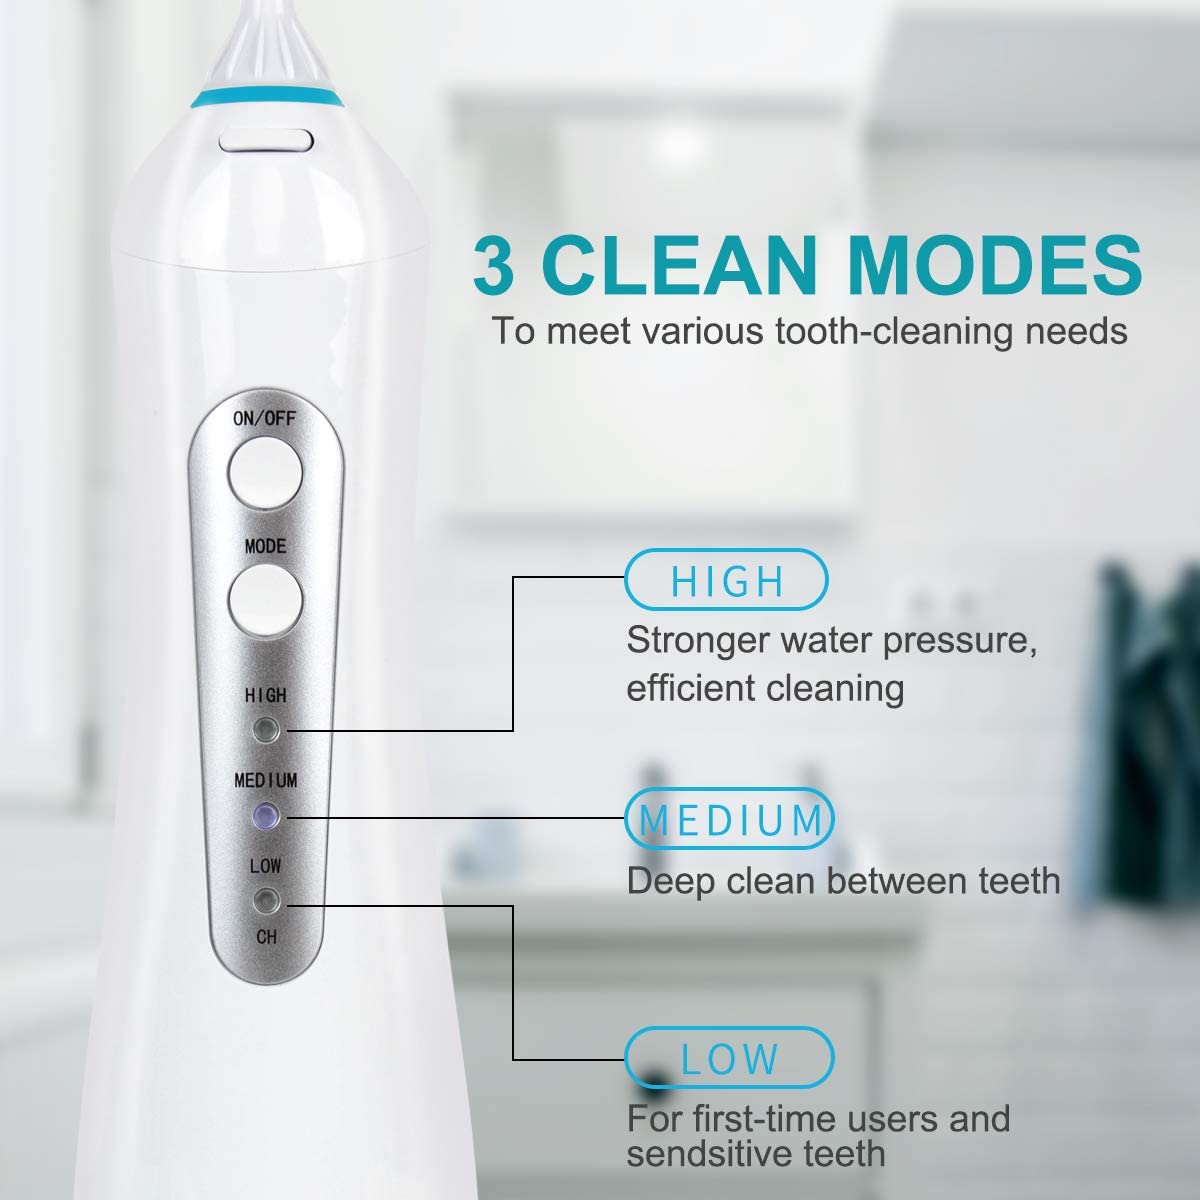 Kmise Water Flosser Pick Professional Cordless Dental Oral Irrigator - 200ML Portable and Rechargeable IPX7 Waterproof 3 Modes with 6 Jet Tips for Travel Home Use (Blue) - AKLOT